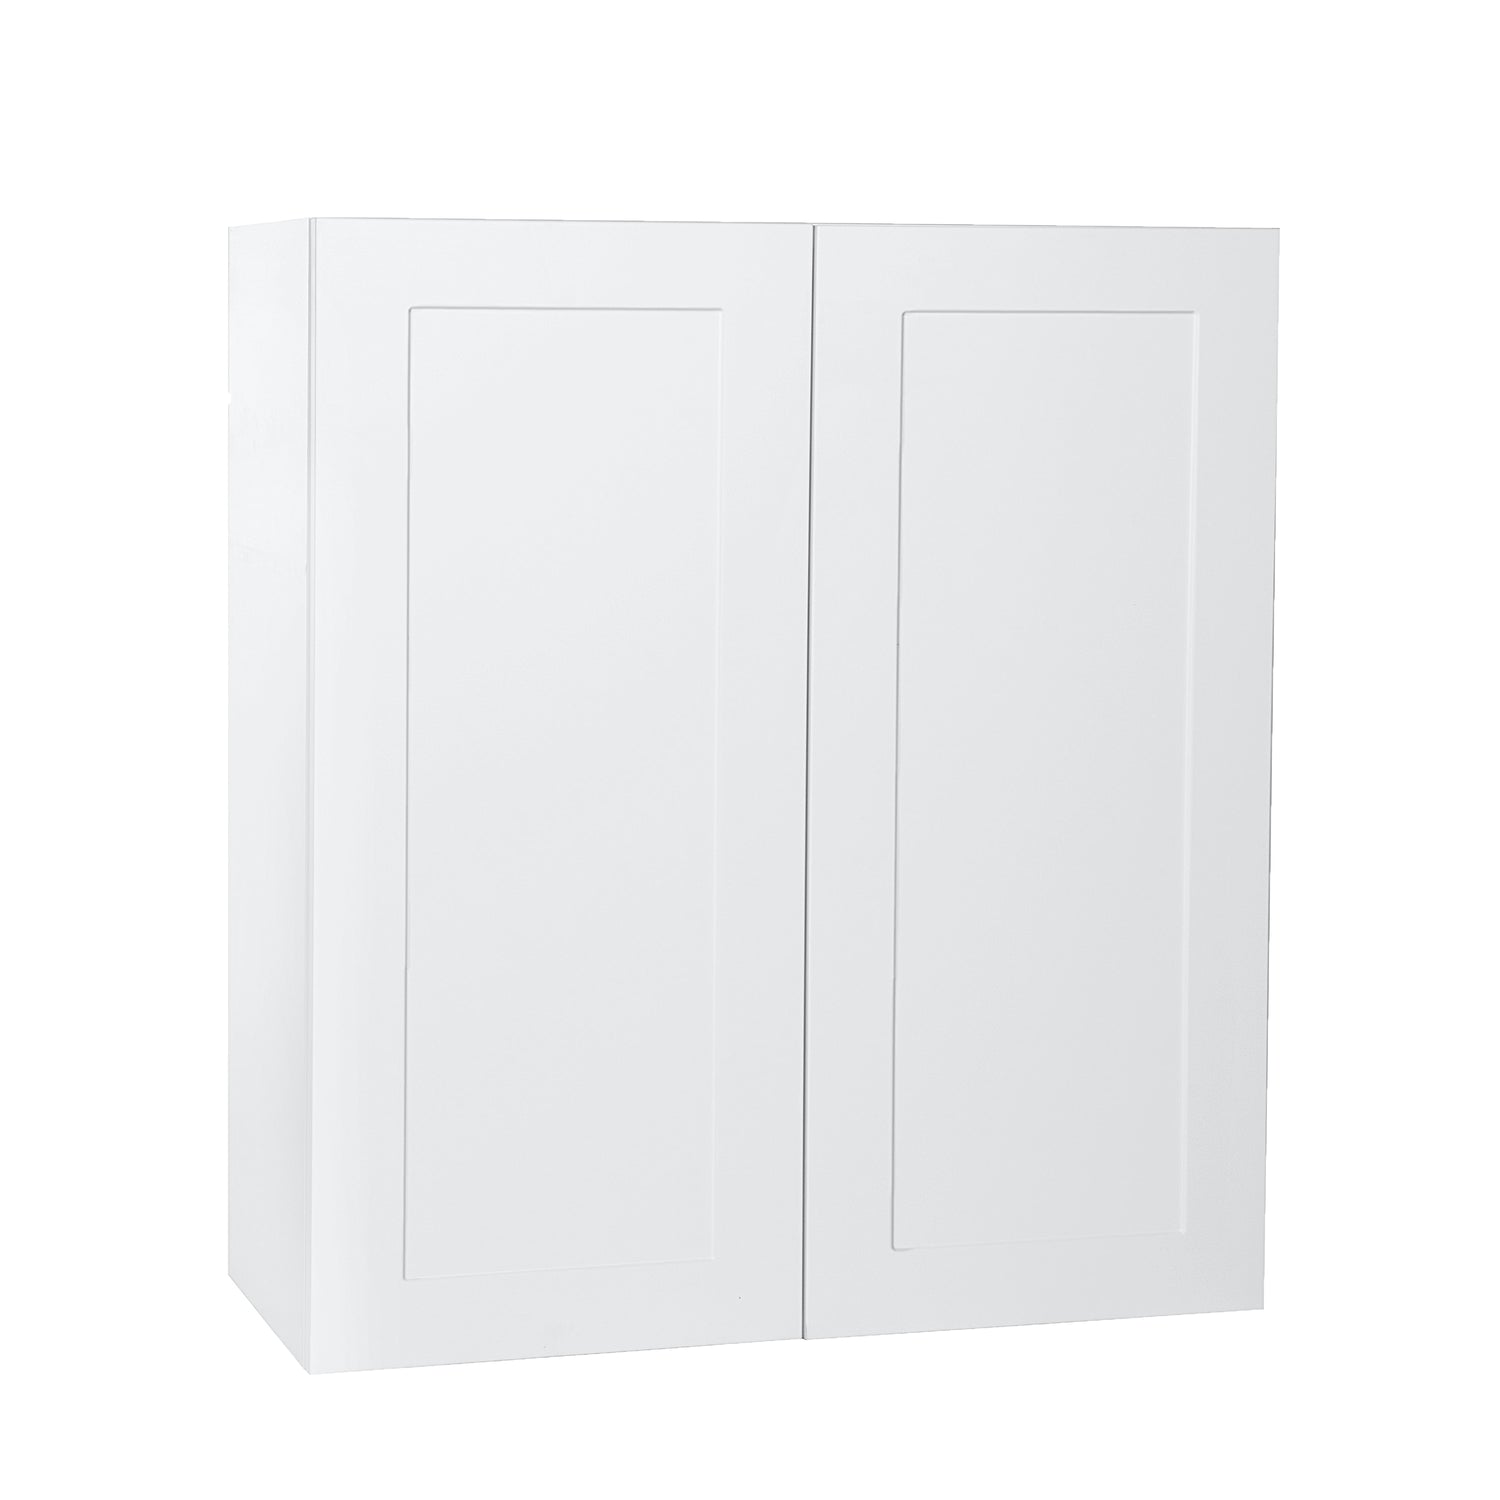 Quick Assemble Modern Style with Soft Close, White Shaker Wall Kitchen Cabinet, 2 Door (33 in W x 12 D x 30 in H) -  Pro-Edge HD